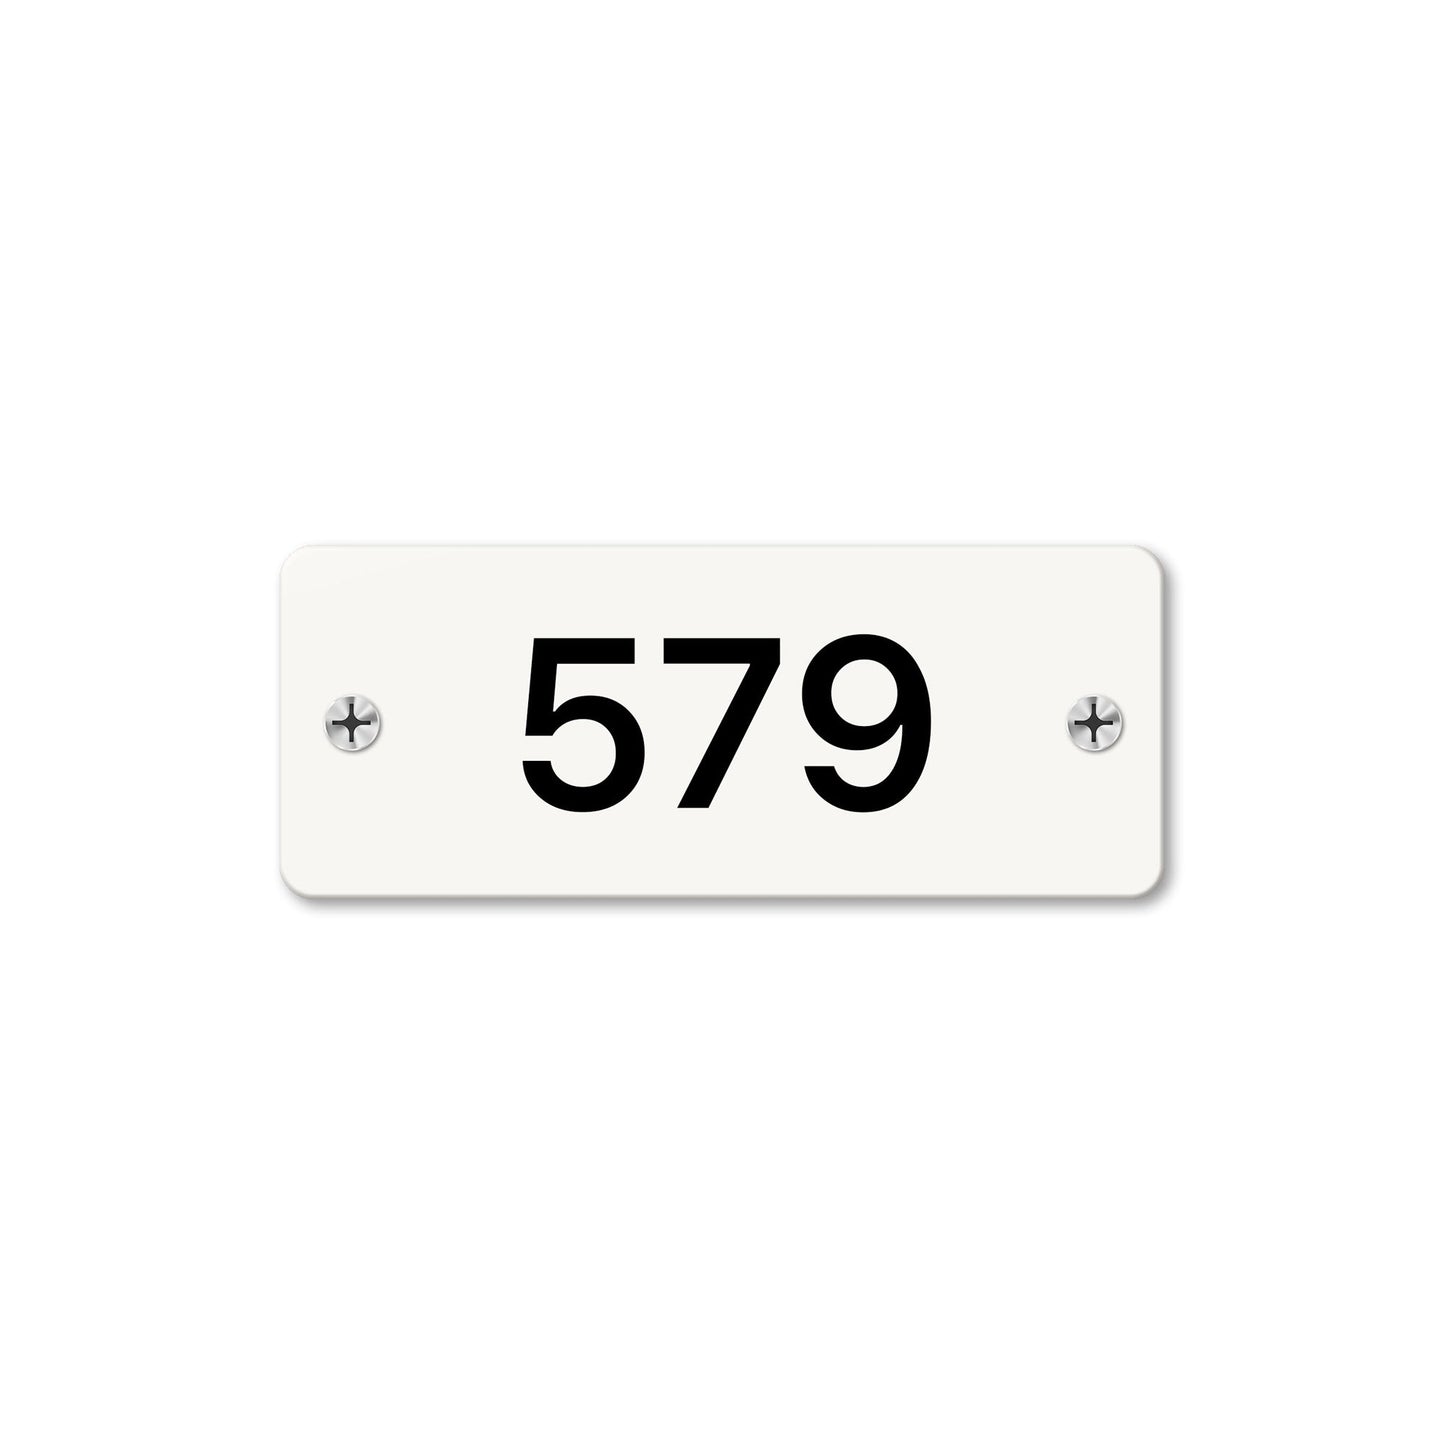 Numeral 579